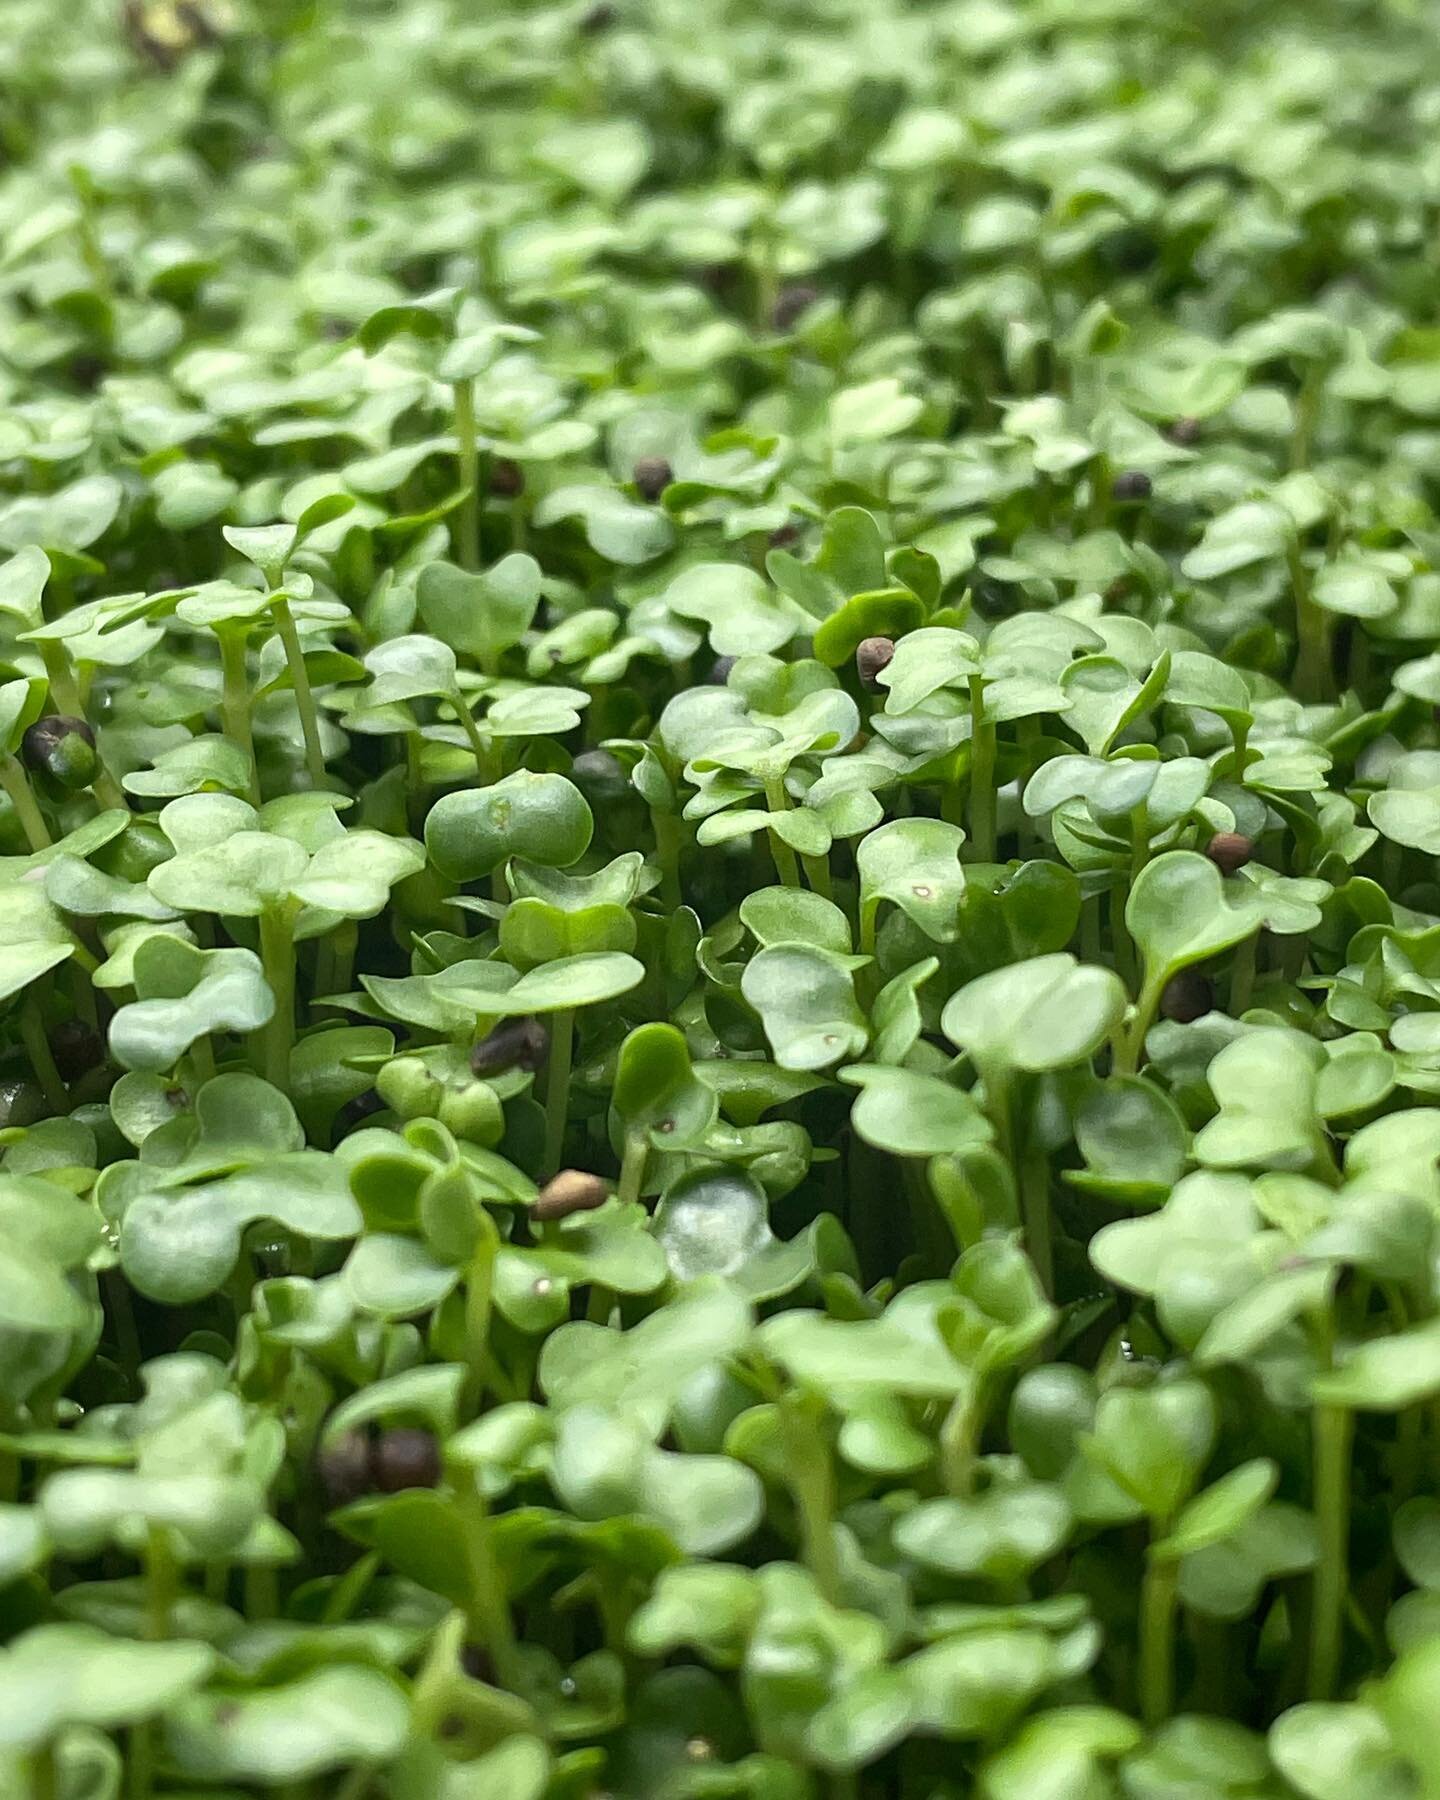 🌊 Come surf 🏄 in our seas of greens!🌊

***********************************
-Broccoli microgreens contain up to 40x as many vitamins and nutrients by density compared to regular broccoli. 

- They are also rich in Sulforaphane, which has been shown